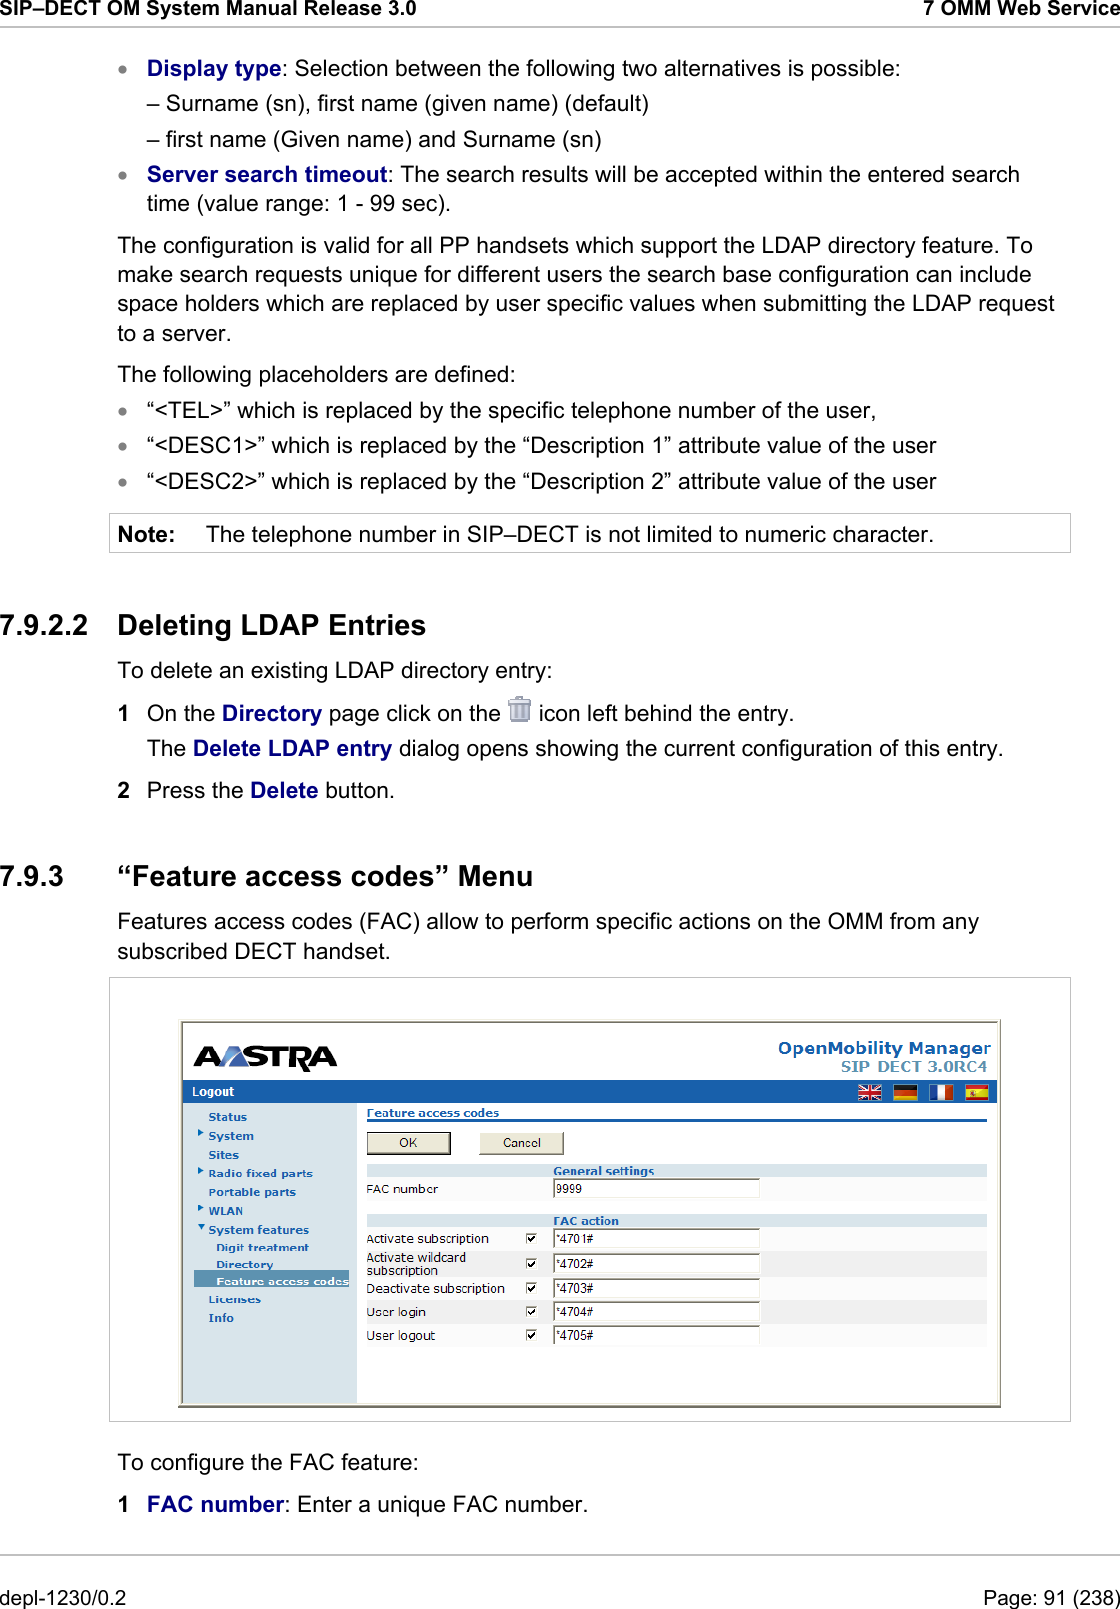 SIP–DECT OM System Manual Release 3.0  7 OMM Web Service • • • • • Note: Display type: Selection between the following two alternatives is possible: – Surname (sn), first name (given name) (default) – first name (Given name) and Surname (sn) Server search timeout: The search results will be accepted within the entered search time (value range: 1 - 99 sec). The configuration is valid for all PP handsets which support the LDAP directory feature. To make search requests unique for different users the search base configuration can include space holders which are replaced by user specific values when submitting the LDAP request to a server. The following placeholders are defined: “&lt;TEL&gt;” which is replaced by the specific telephone number of the user, “&lt;DESC1&gt;” which is replaced by the “Description 1” attribute value of the user “&lt;DESC2&gt;” which is replaced by the “Description 2” attribute value of the user The telephone number in SIP–DECT is not limited to numeric character. 7.9.2.2 Deleting LDAP Entries To delete an existing LDAP directory entry:  1  On the Directory page click on the   icon left behind the entry. The Delete LDAP entry dialog opens showing the current configuration of this entry. 2  Press the Delete button. 7.9.3  “Feature access codes” Menu Features access codes (FAC) allow to perform specific actions on the OMM from any subscribed DECT handset.   To configure the FAC feature:  1  FAC number: Enter a unique FAC number. depl-1230/0.2  Page: 91 (238) 